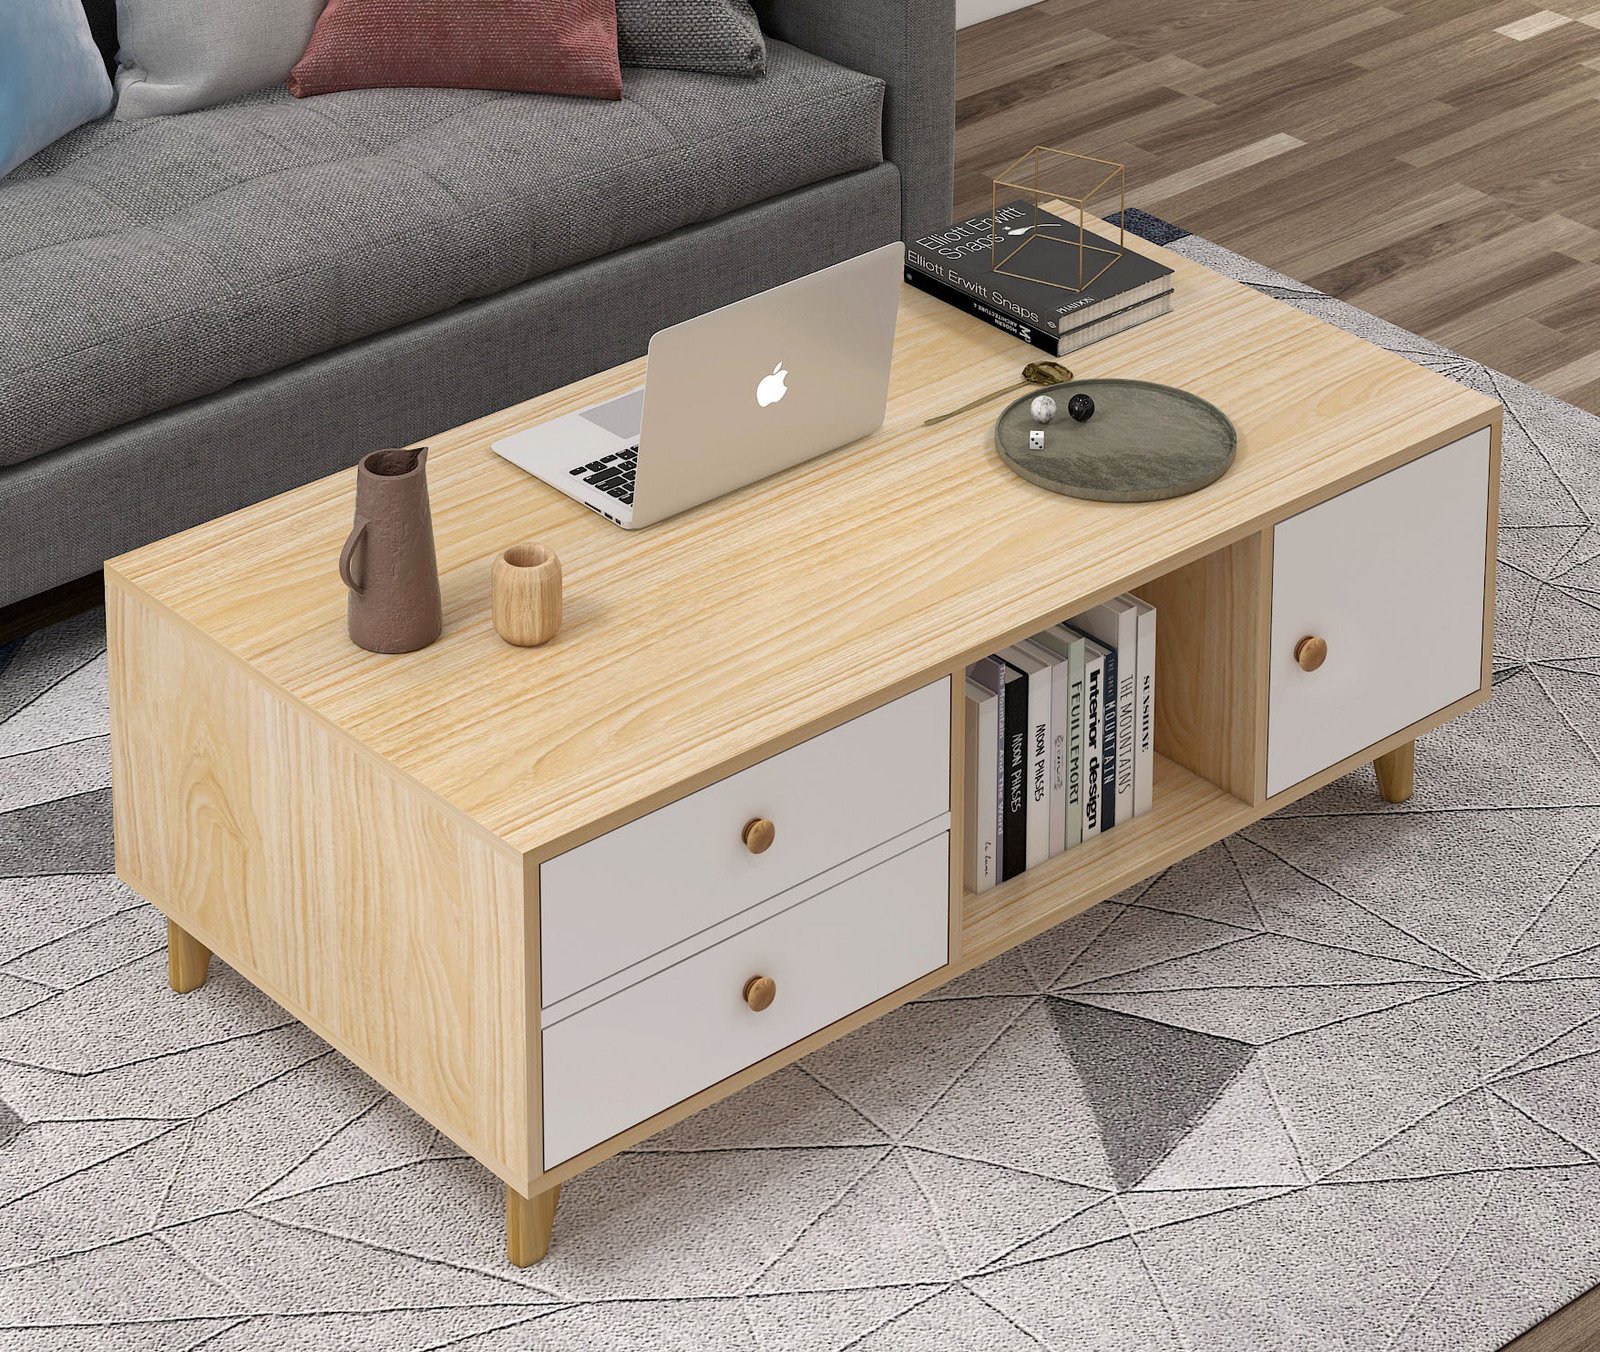 Deluxe Unity Wooden Coffee Table with Drawers 